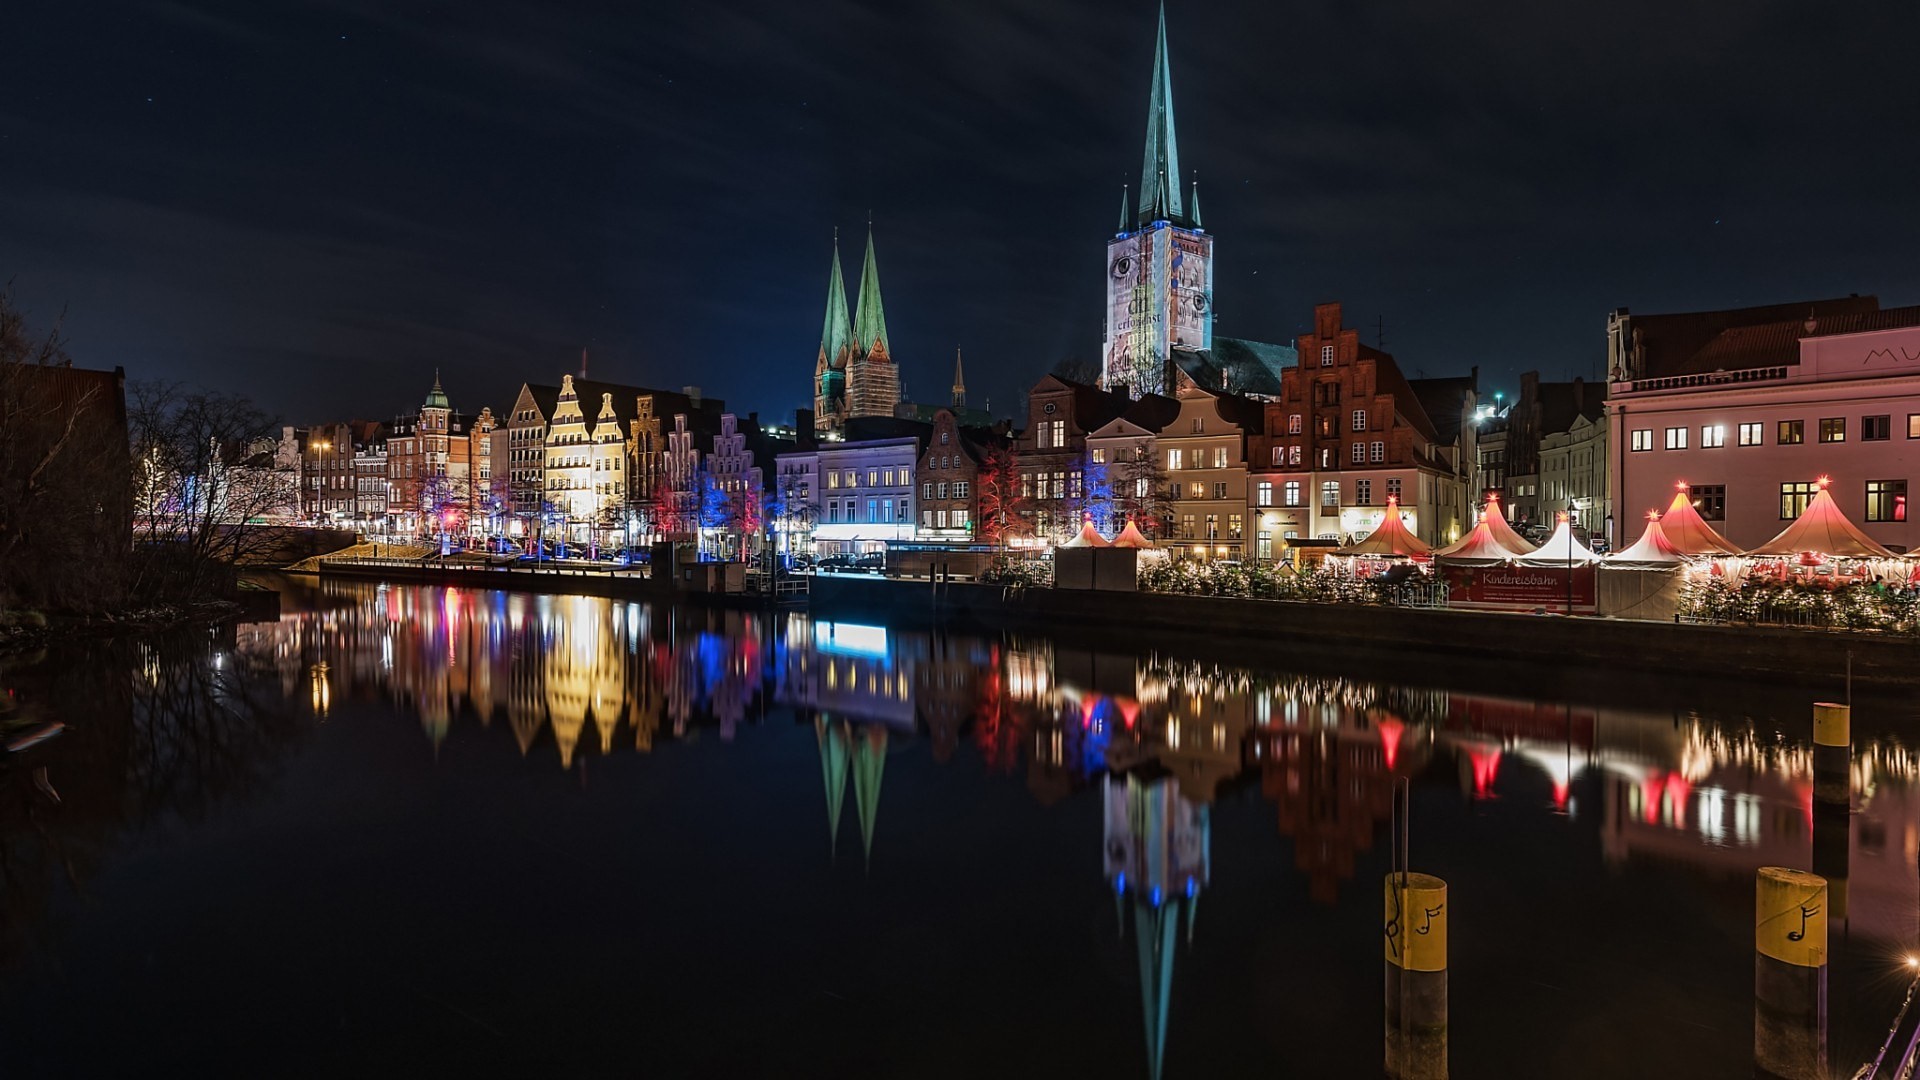 architecture, City, Cityscape, Building, Lübeck, Germany, River, Night, Clouds, Church, House, Lights, Markets, Trees, Tower, Long exposure, Winter, Reflection, Street Wallpaper